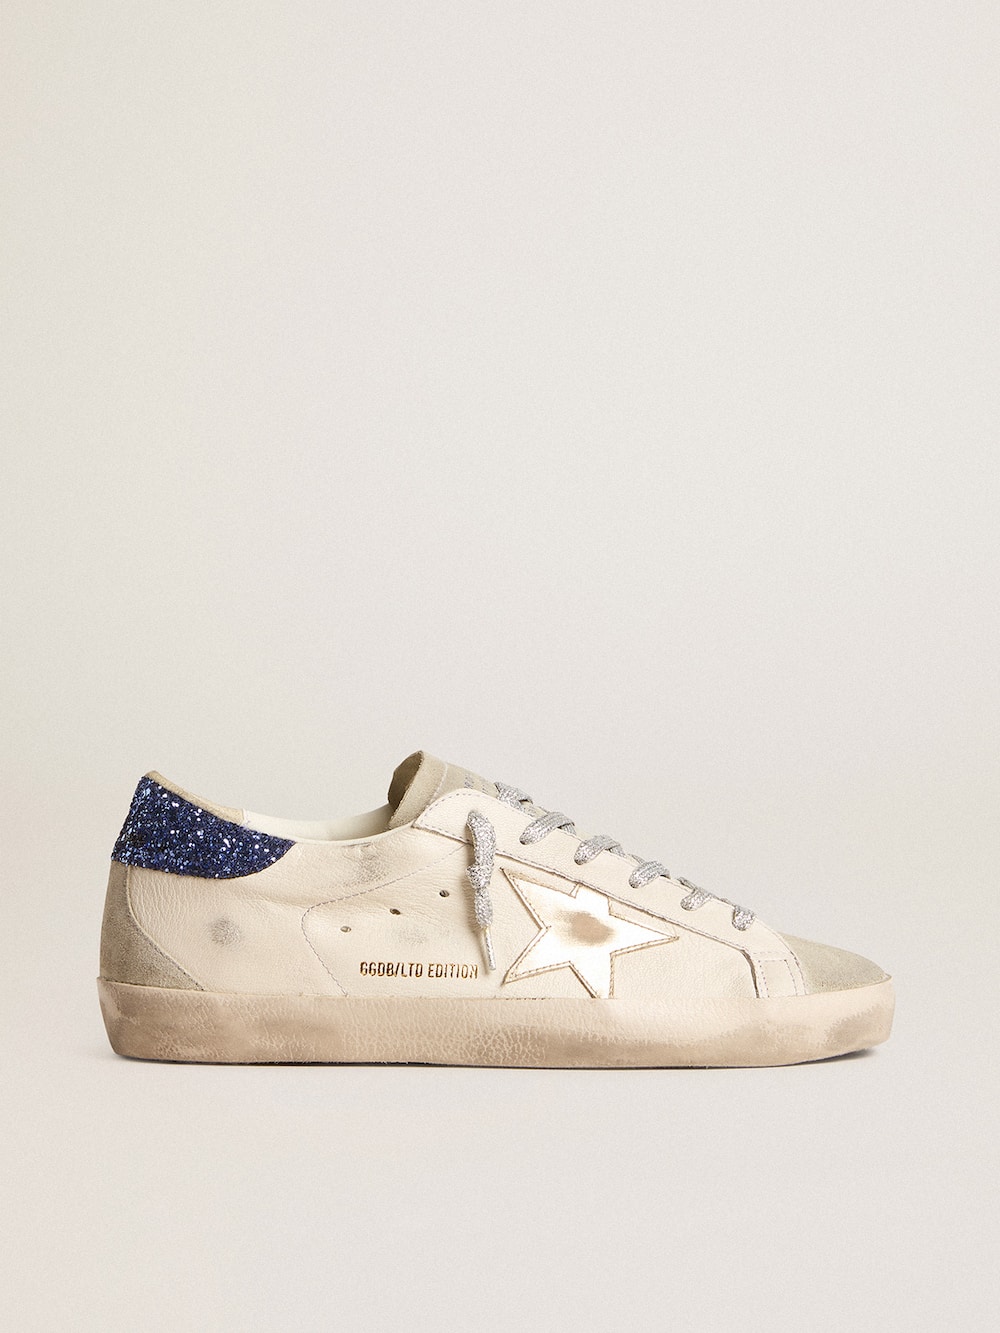 Golden Goose - Women's Super-Star LTD in nappa leather with platinum star and blue glitter heel tab in 